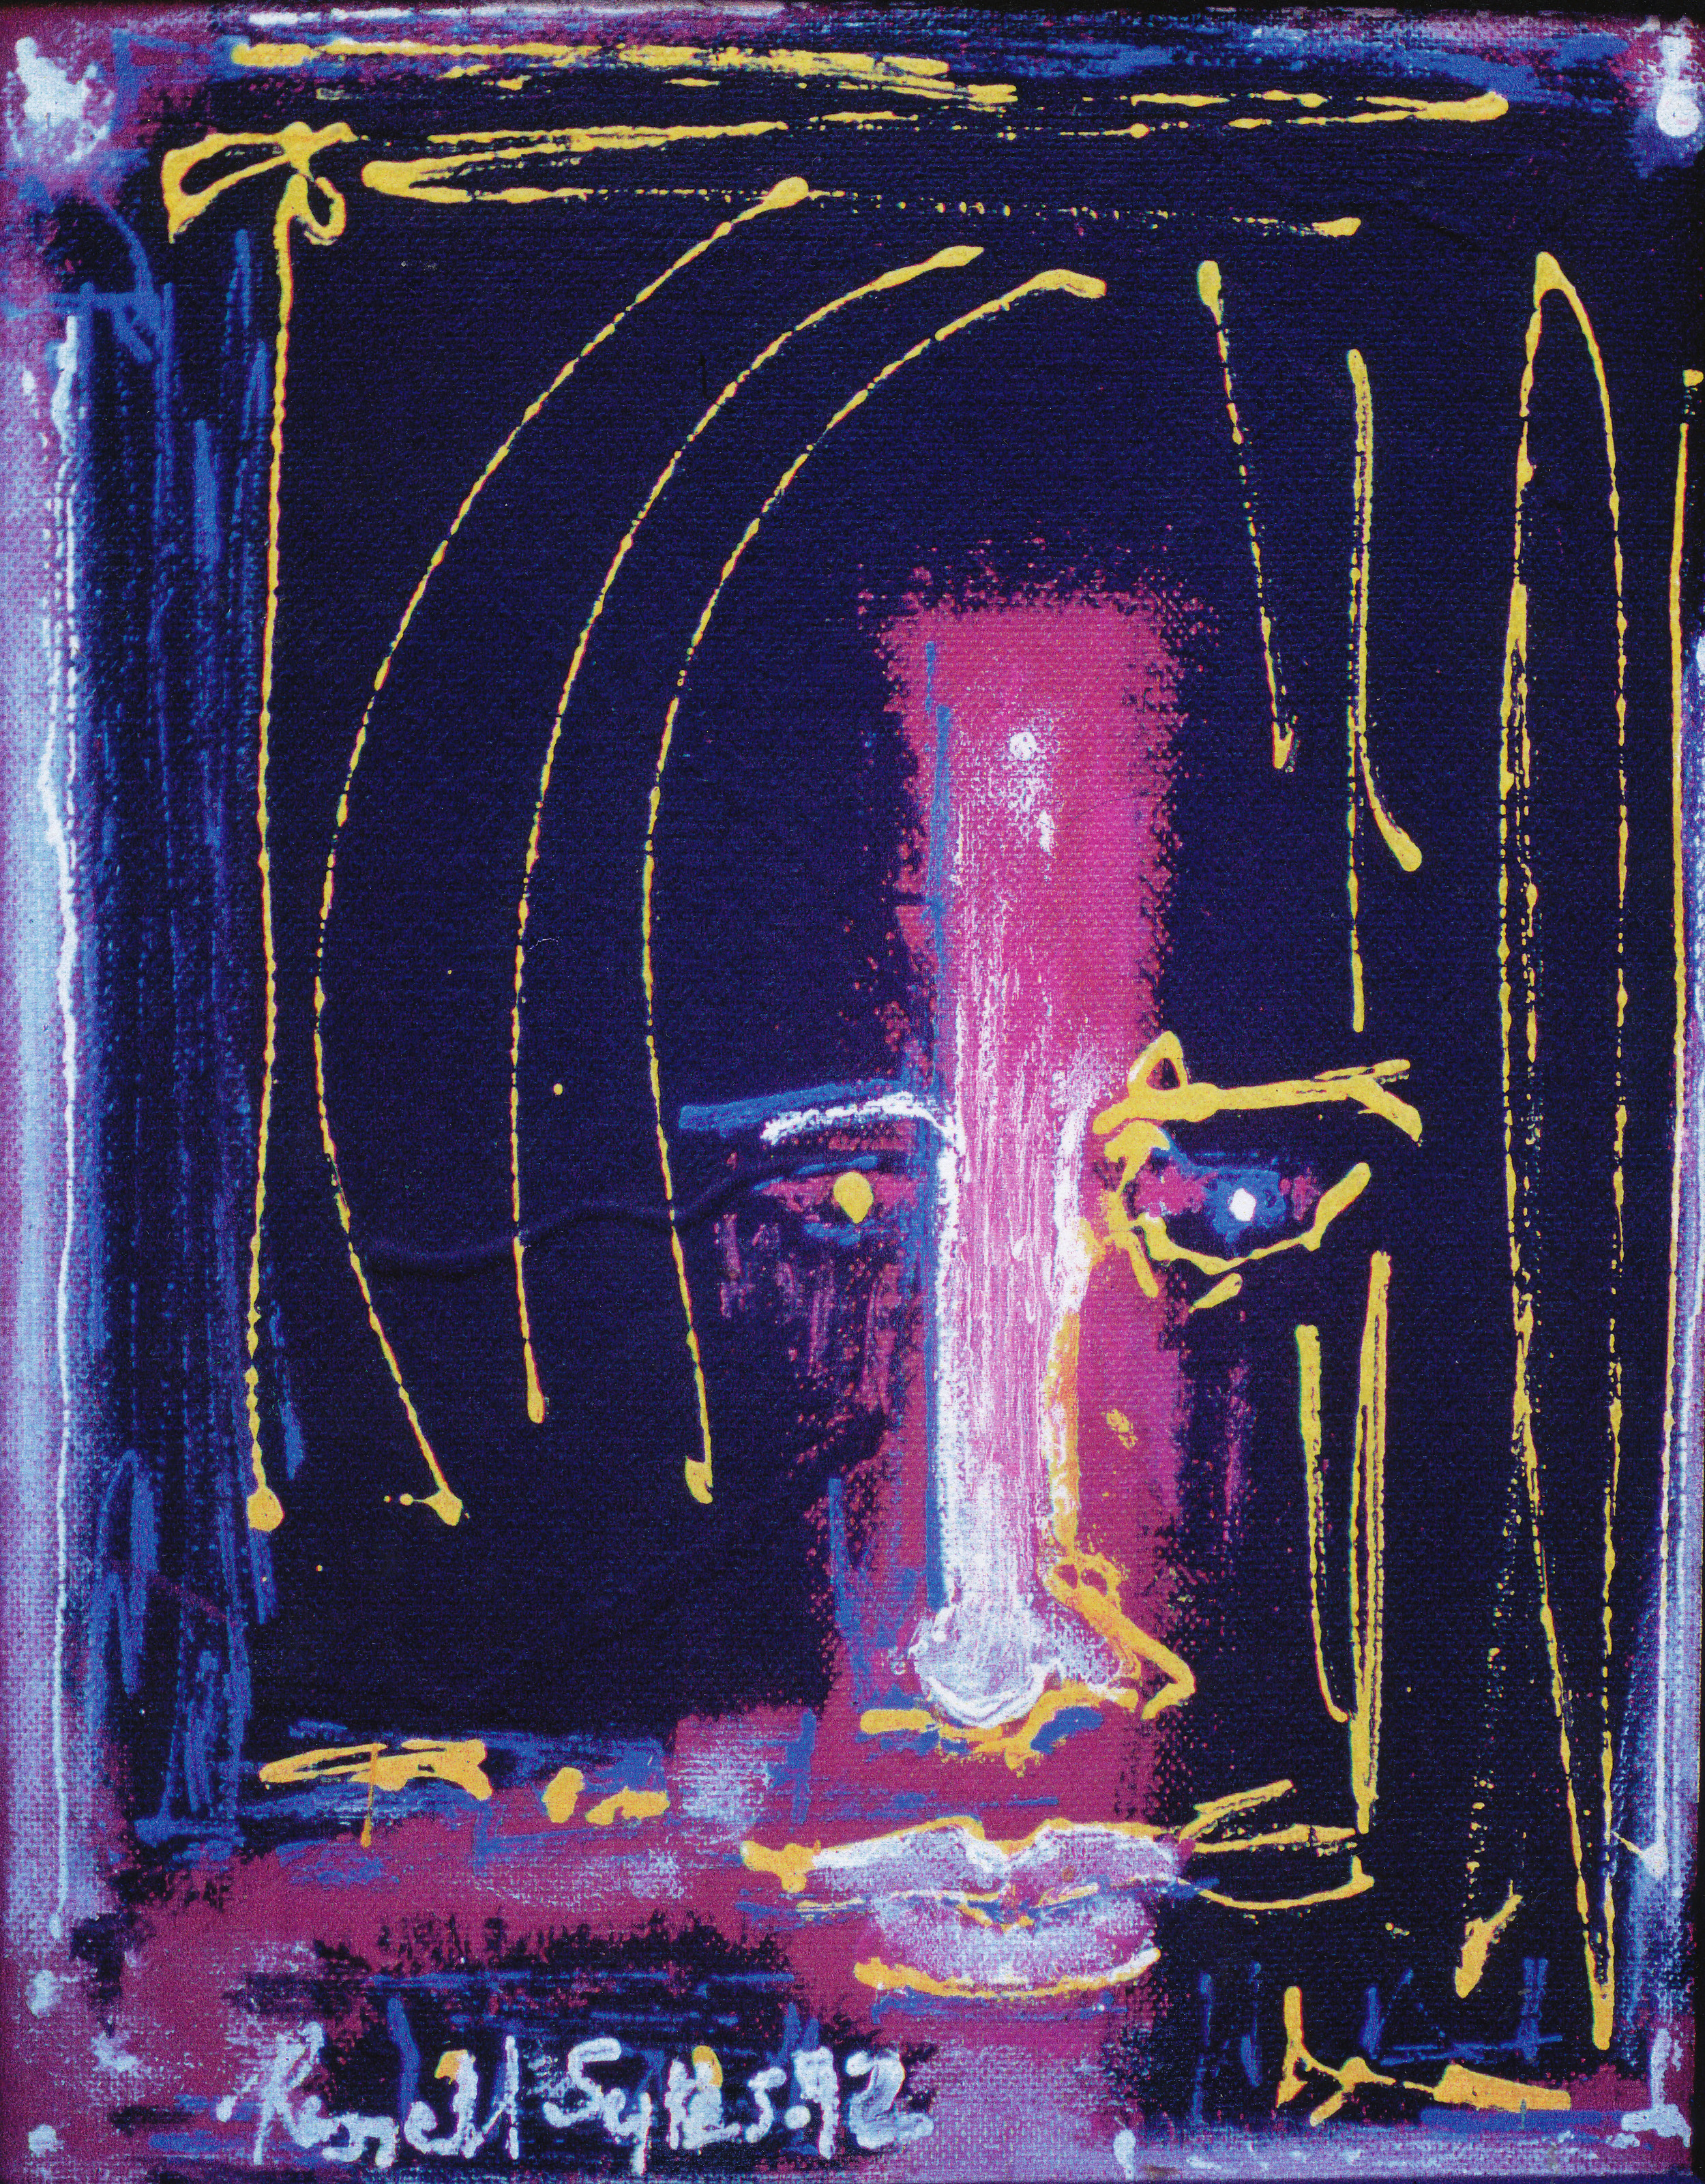 Untitled, Man with Dreads, 1992